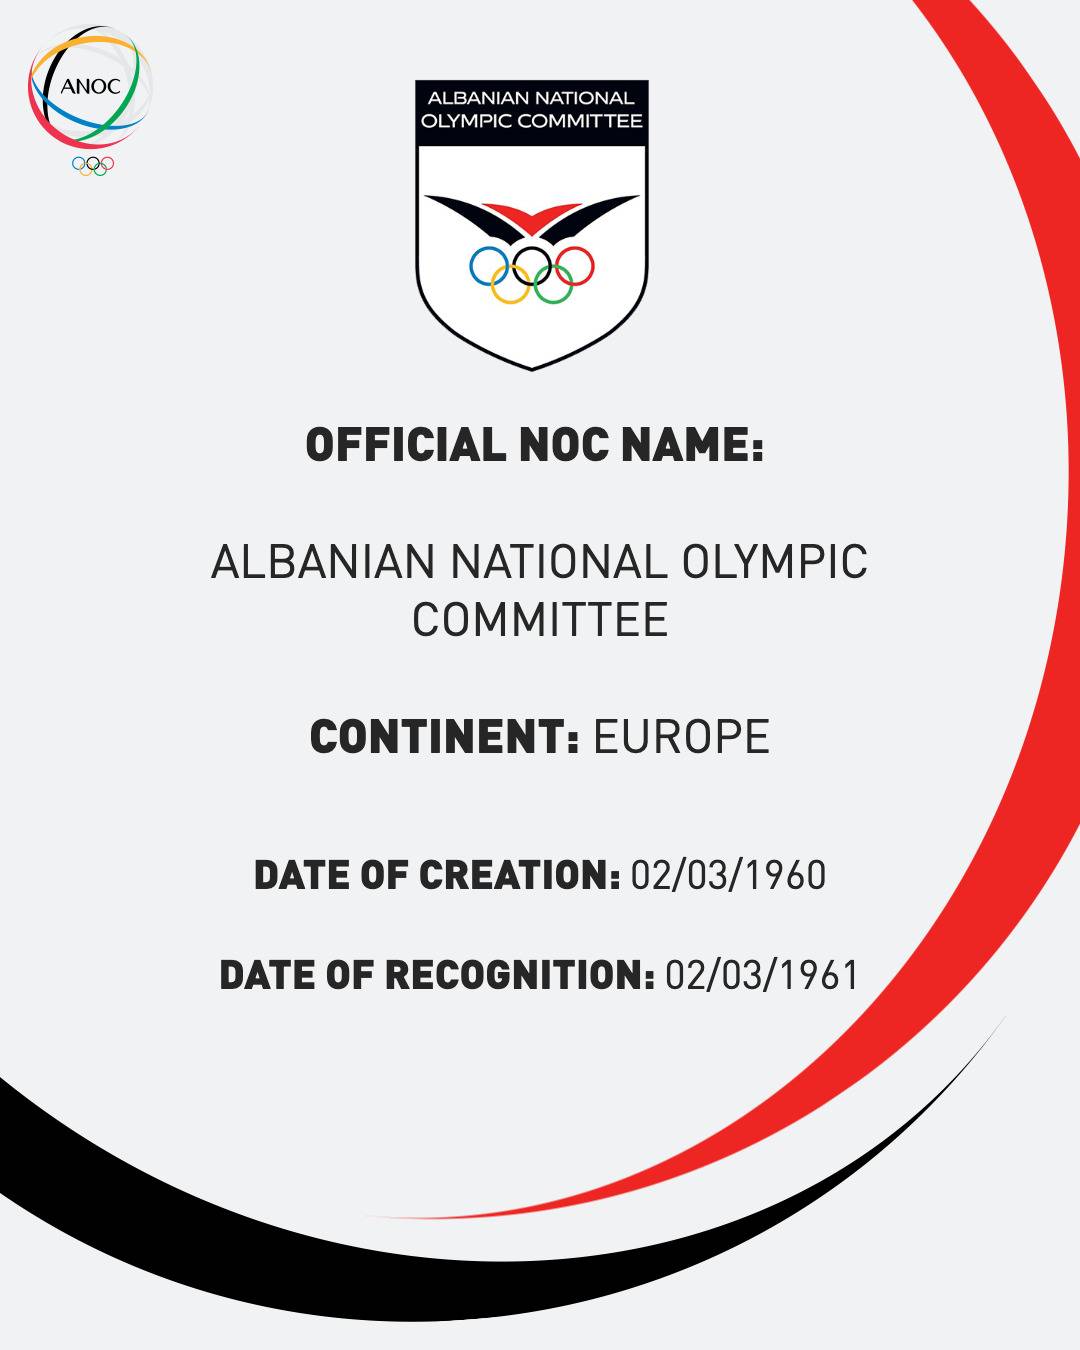 Albanian National Olympic Committee